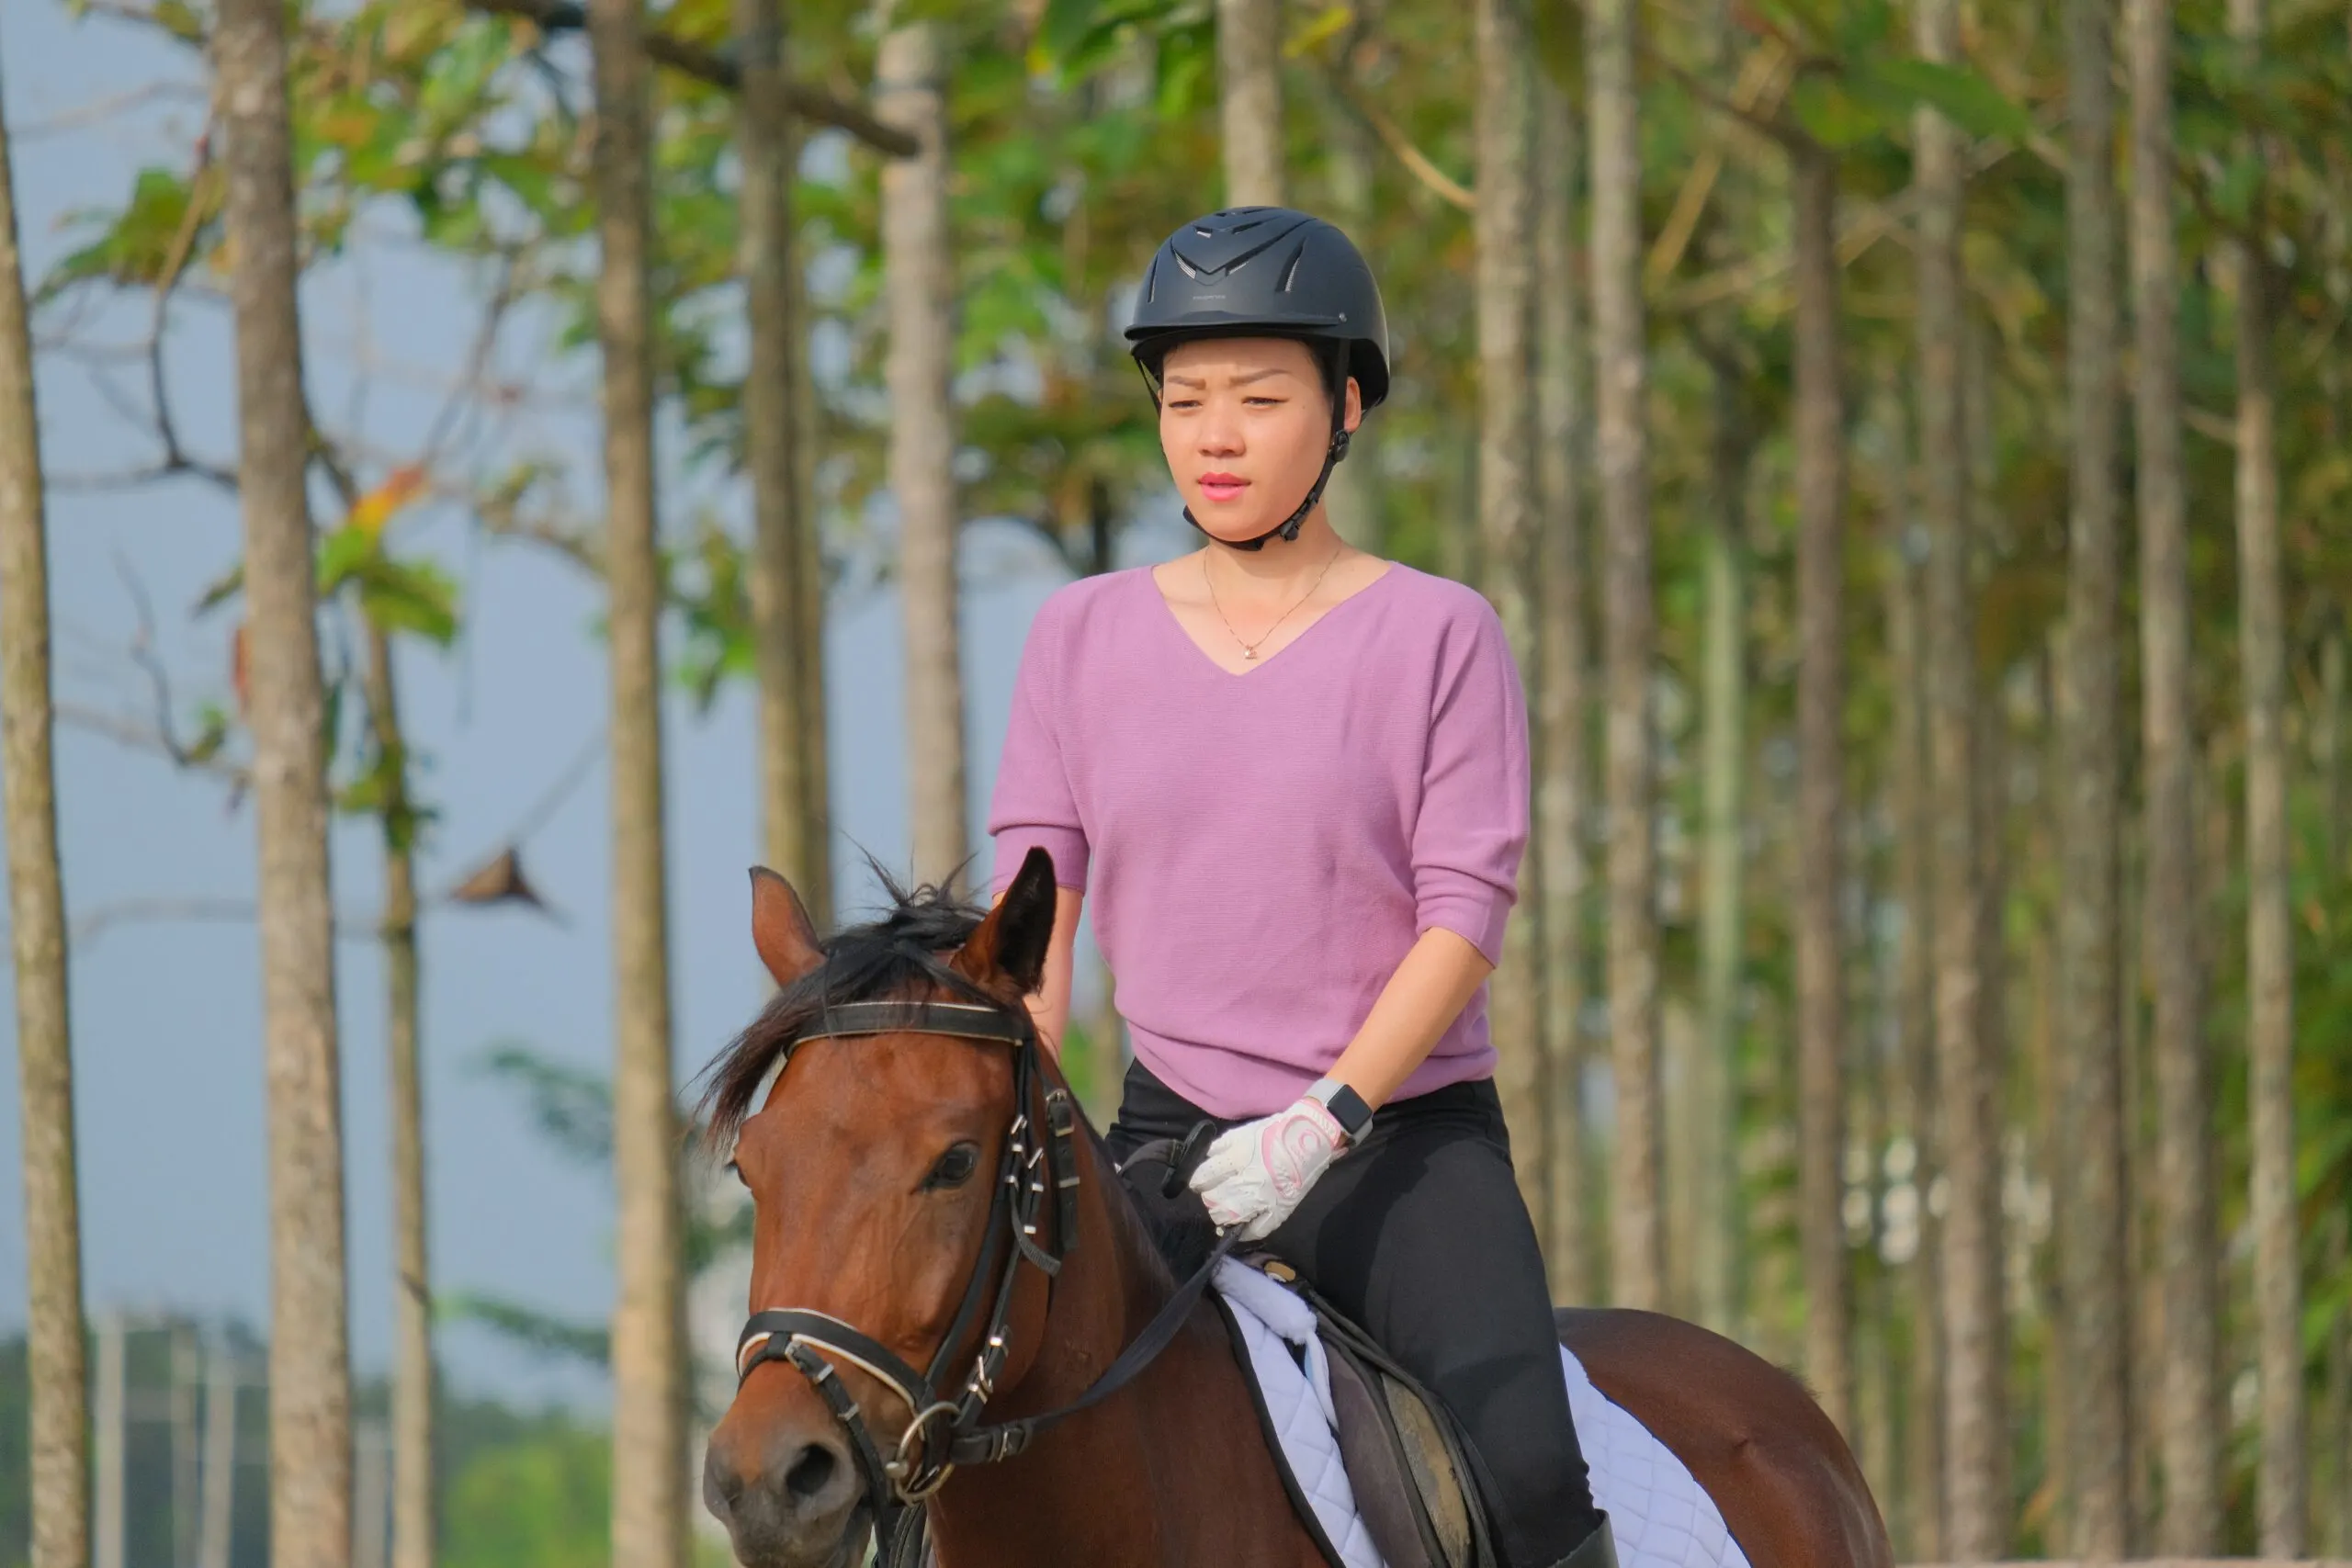 A woman in a pink shirt, helmet, and gloves rides a brown horse.